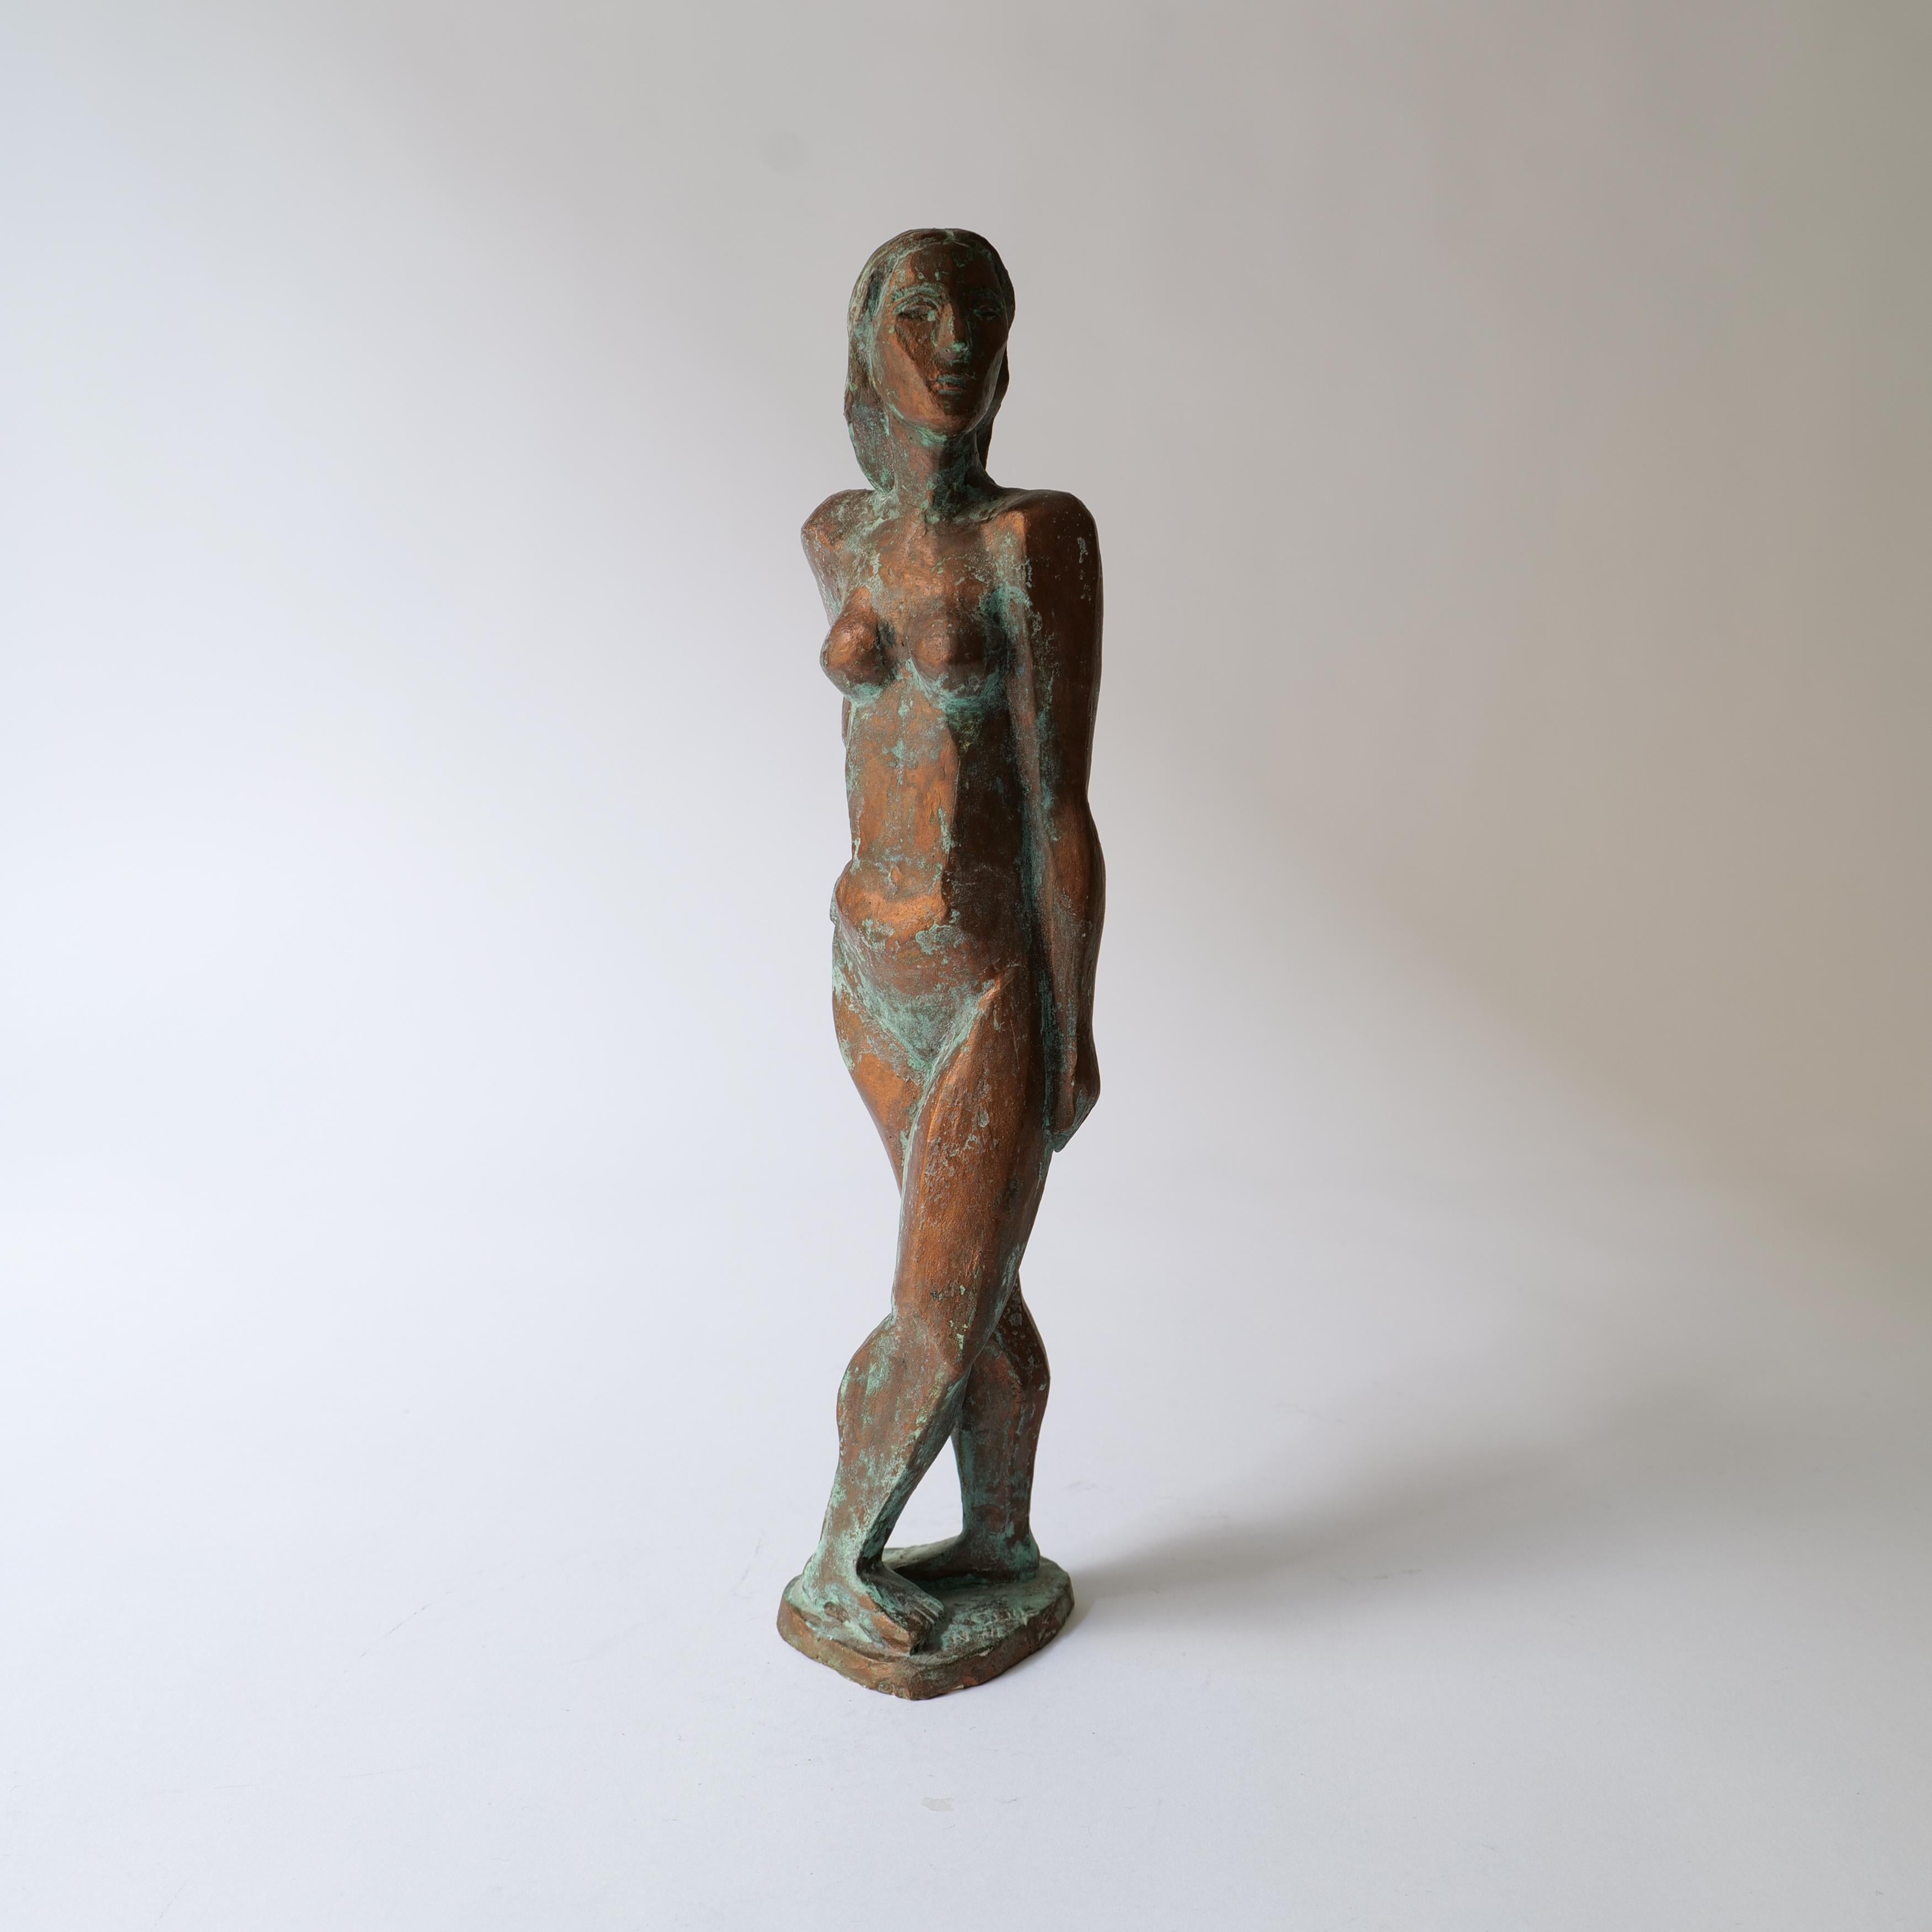 A standing nude with a contemplative stance by Roland Alf (1929-2020) entitled 'Elin'. Plaster of paris and glazed with a patinated bronze. A unique and original piece signed and dated by Roland Alf on base. Swedish, 1960s, Height 27cm.

History: